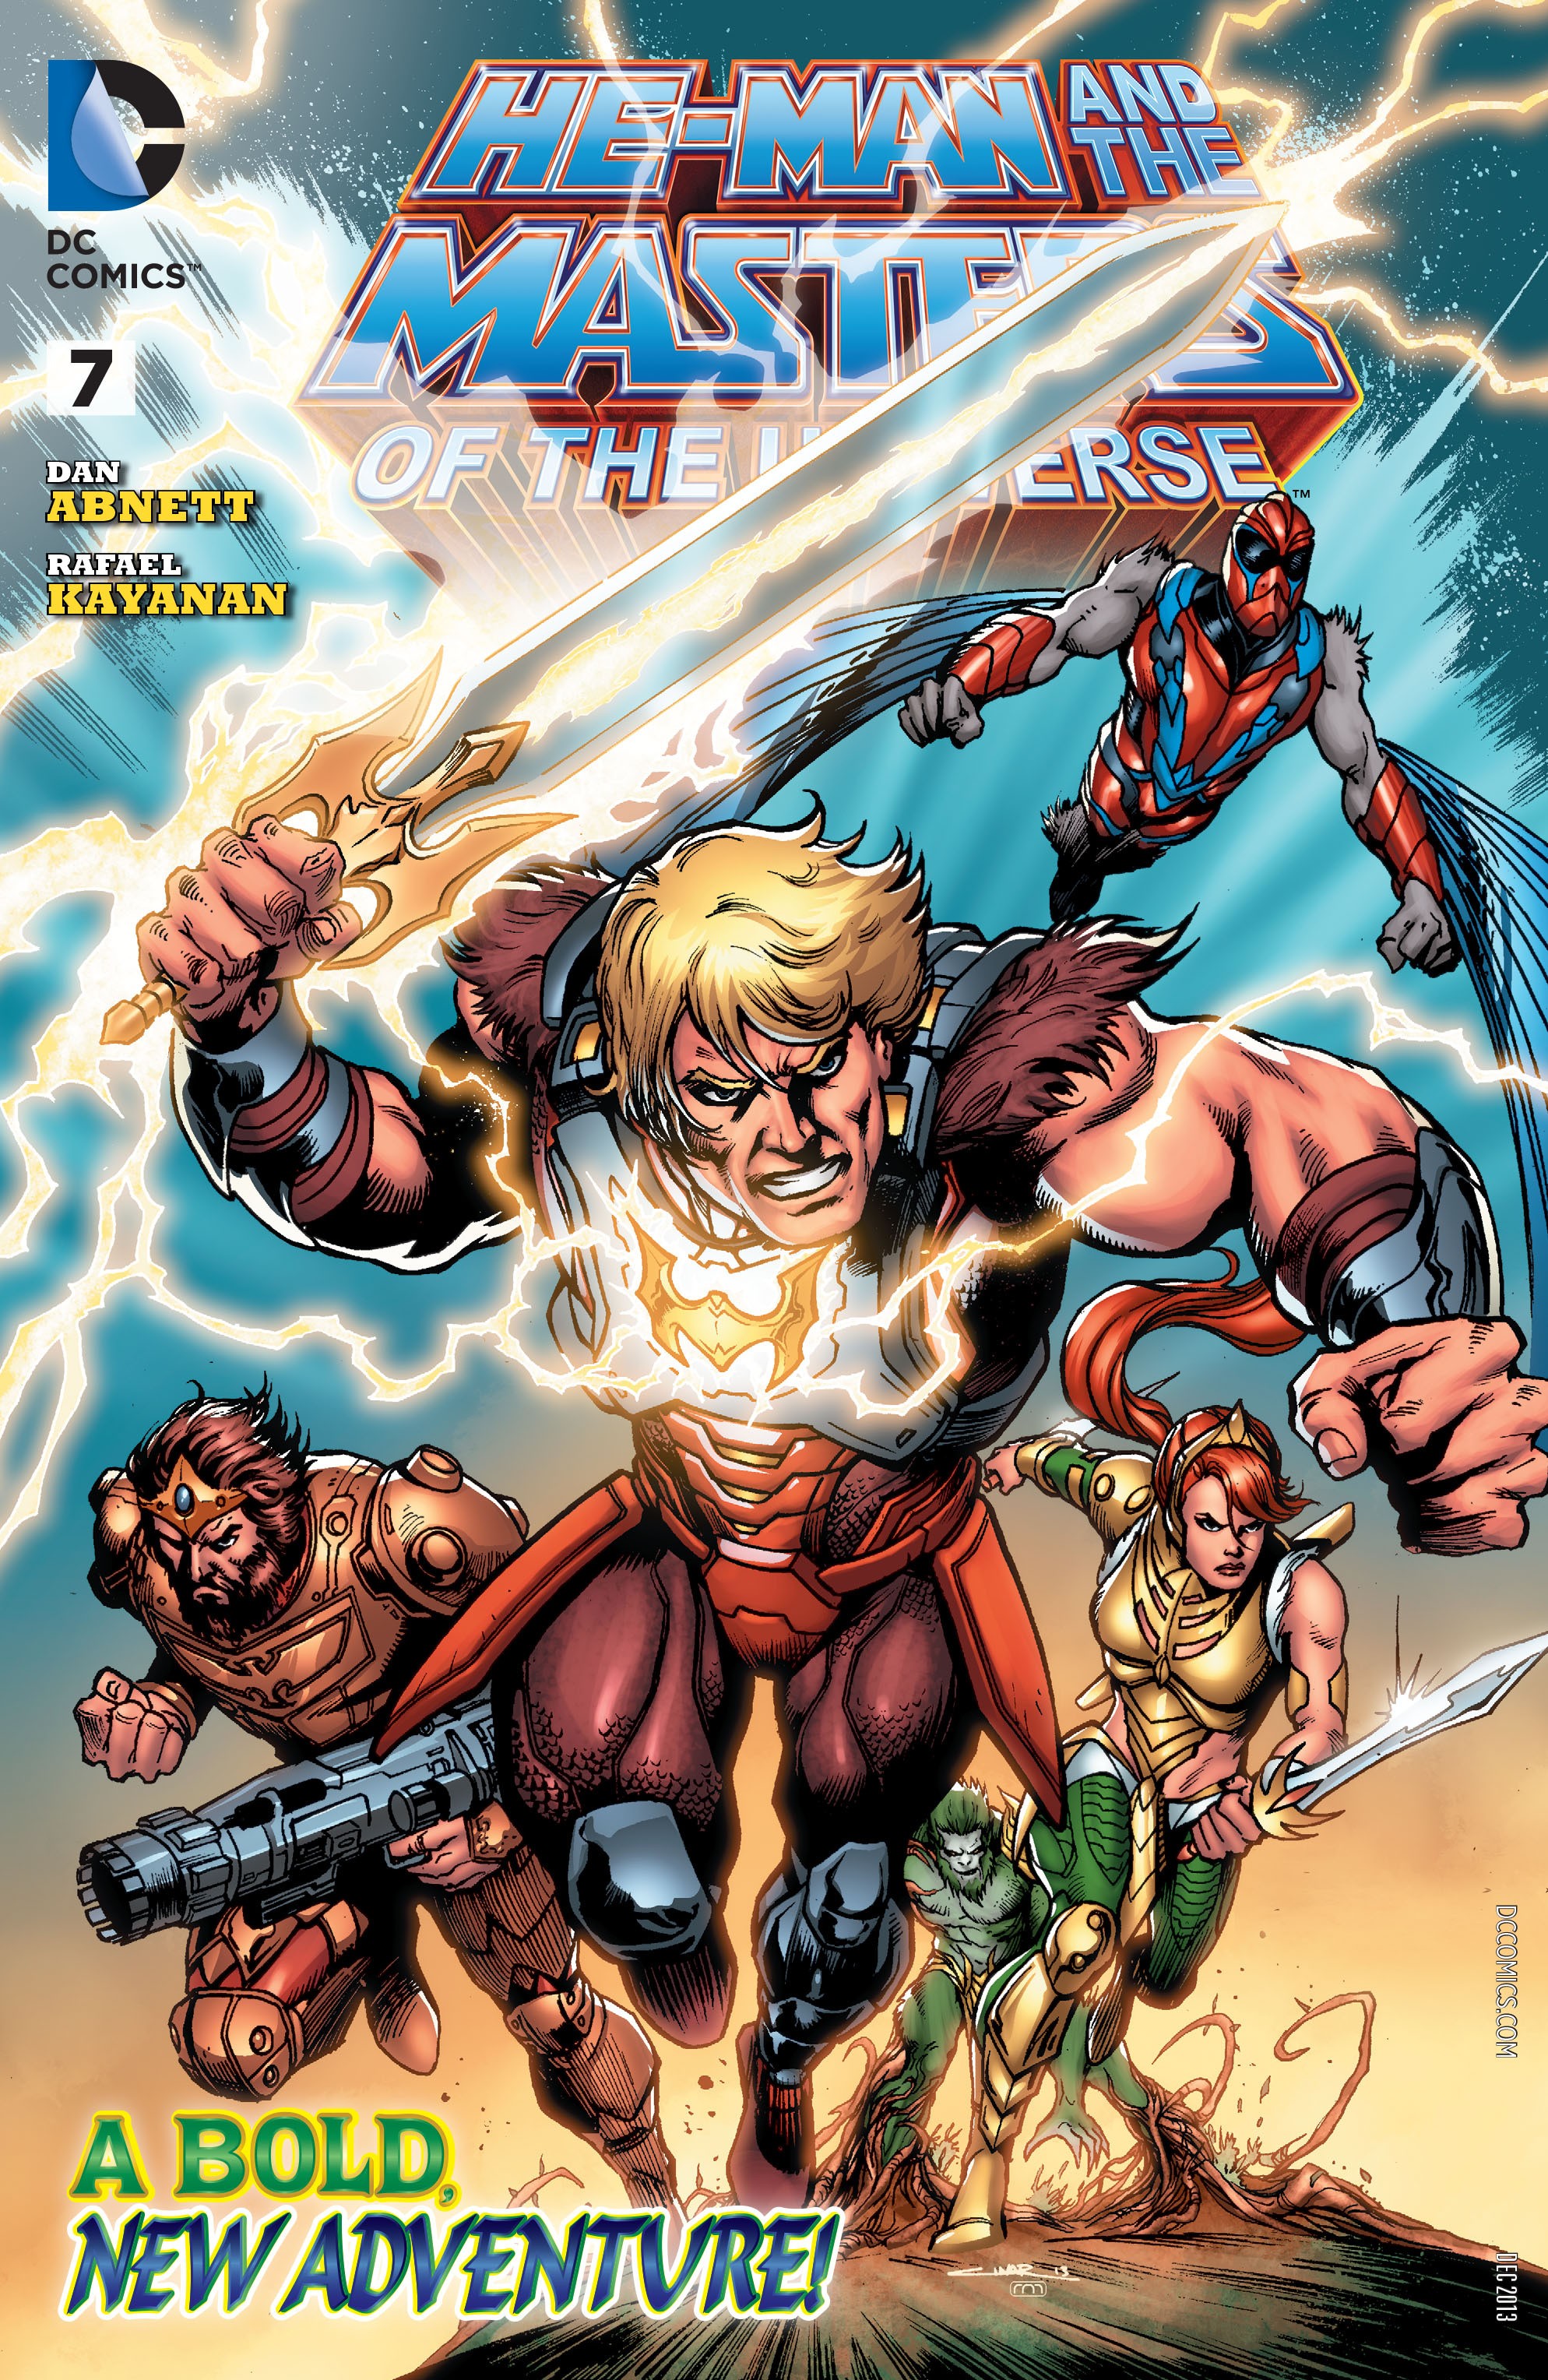 He-Man and the Masters of the Universe Vol. 2 #7